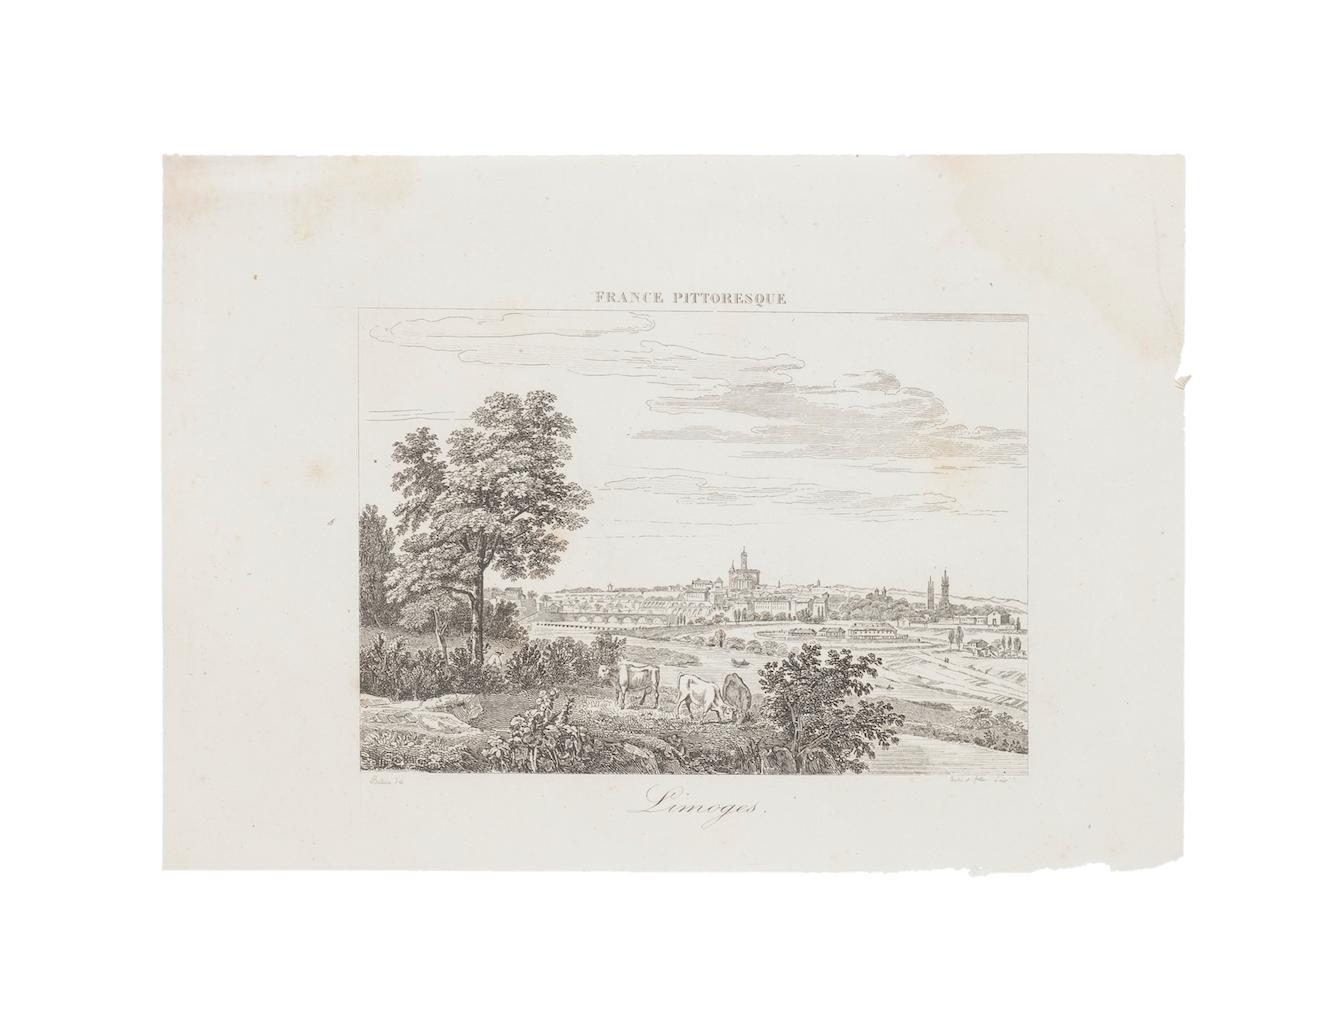 Unknown Landscape Print - Limoges - Etching - 19th Century